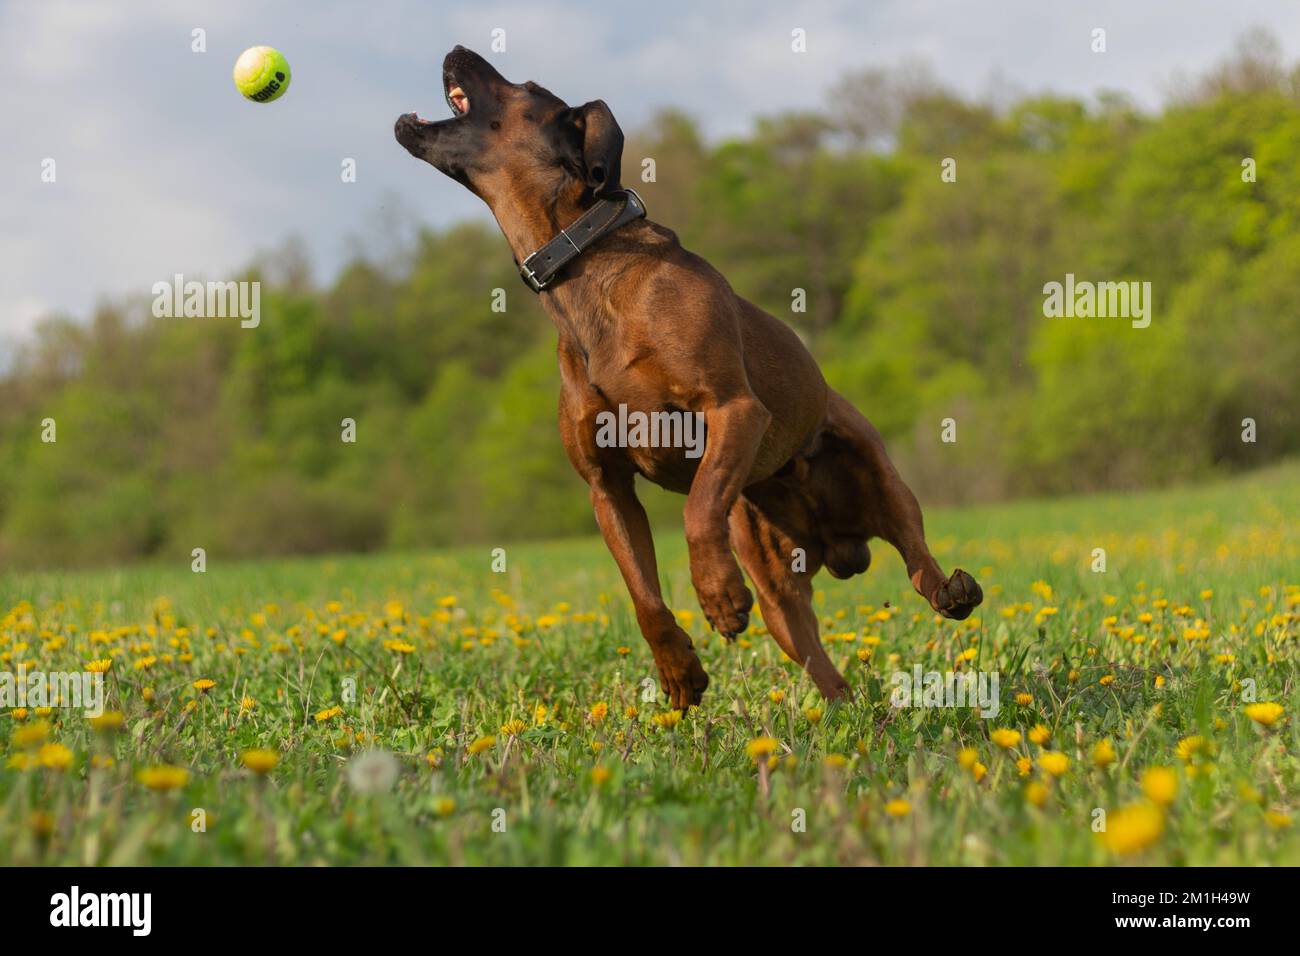 Mid-air image of a playful Bavarian Mountain Hound jumping in the air to catch a ball in the middle of a dandelion field in spring. Stock Photo